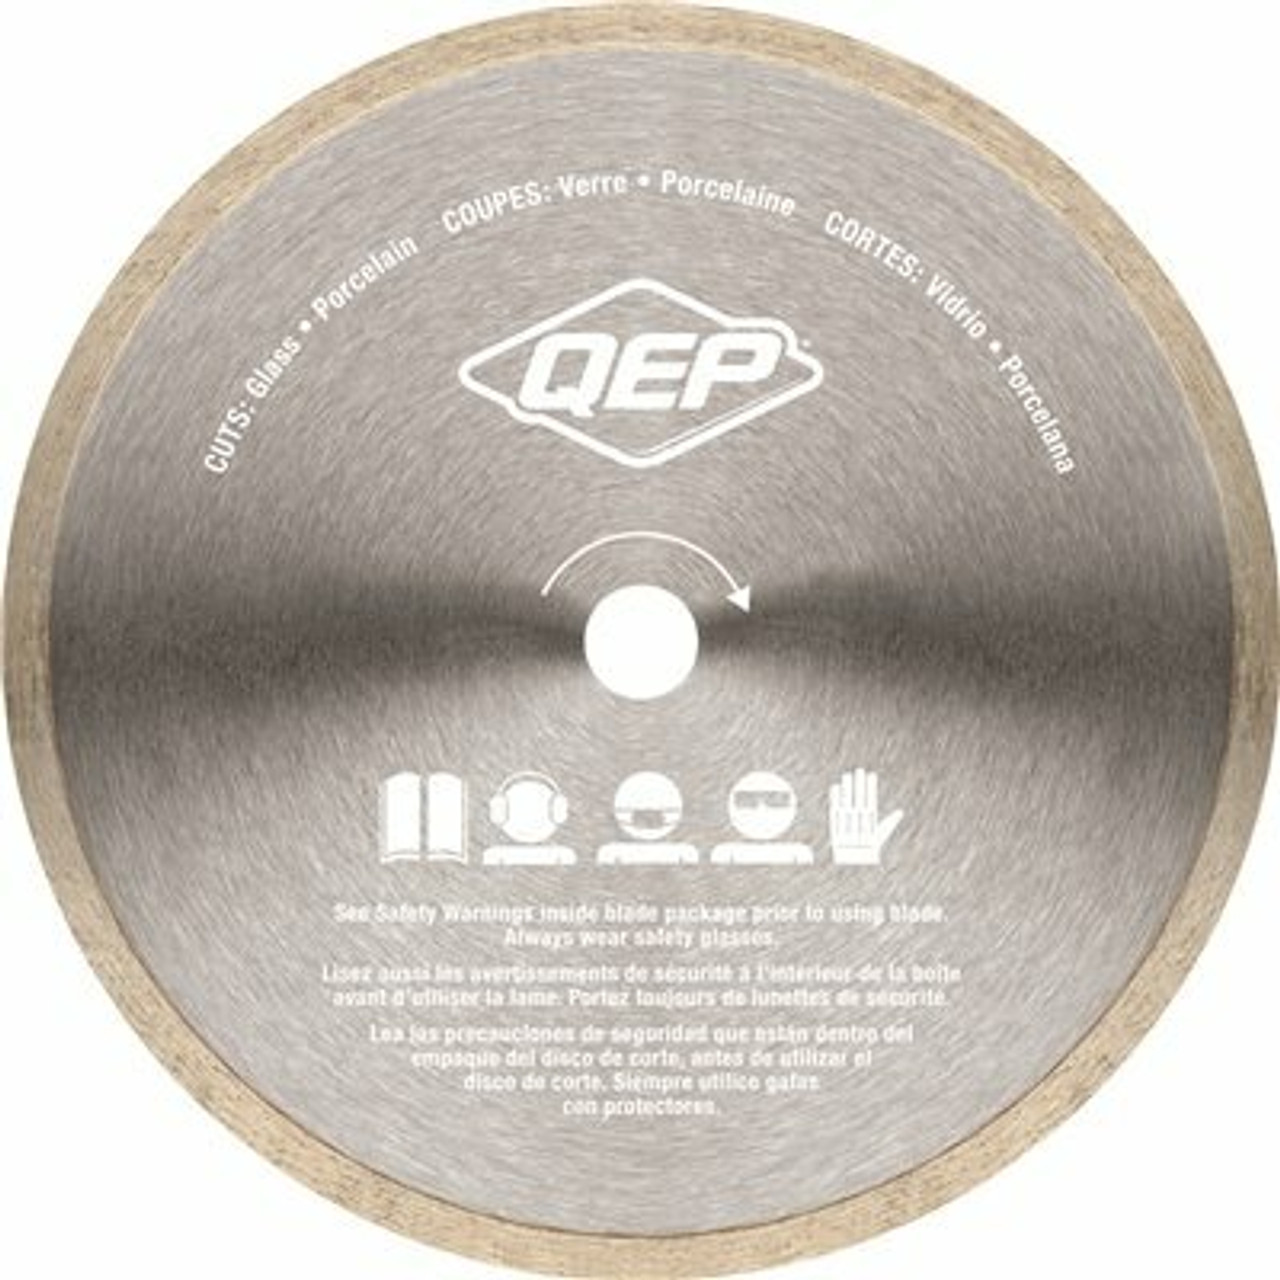 Qep Glass Series 7 In. Wet Tile Saw Continuous Rim Diamond Blade